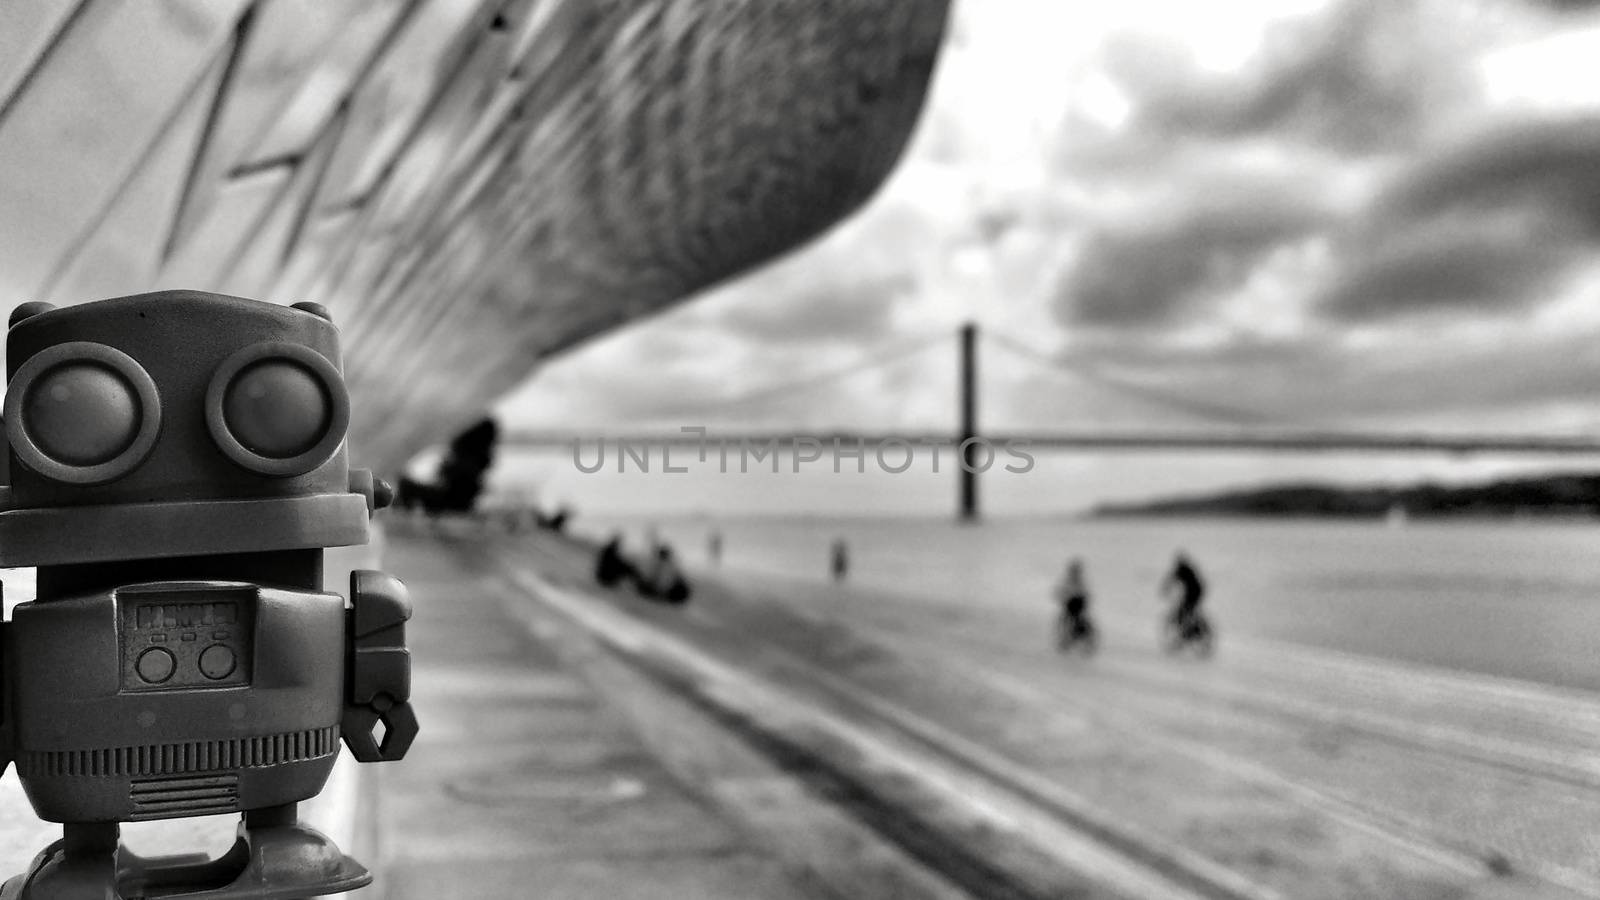 Toy robot on the banks of the Tagus River in Lisbon in a Cloudy day